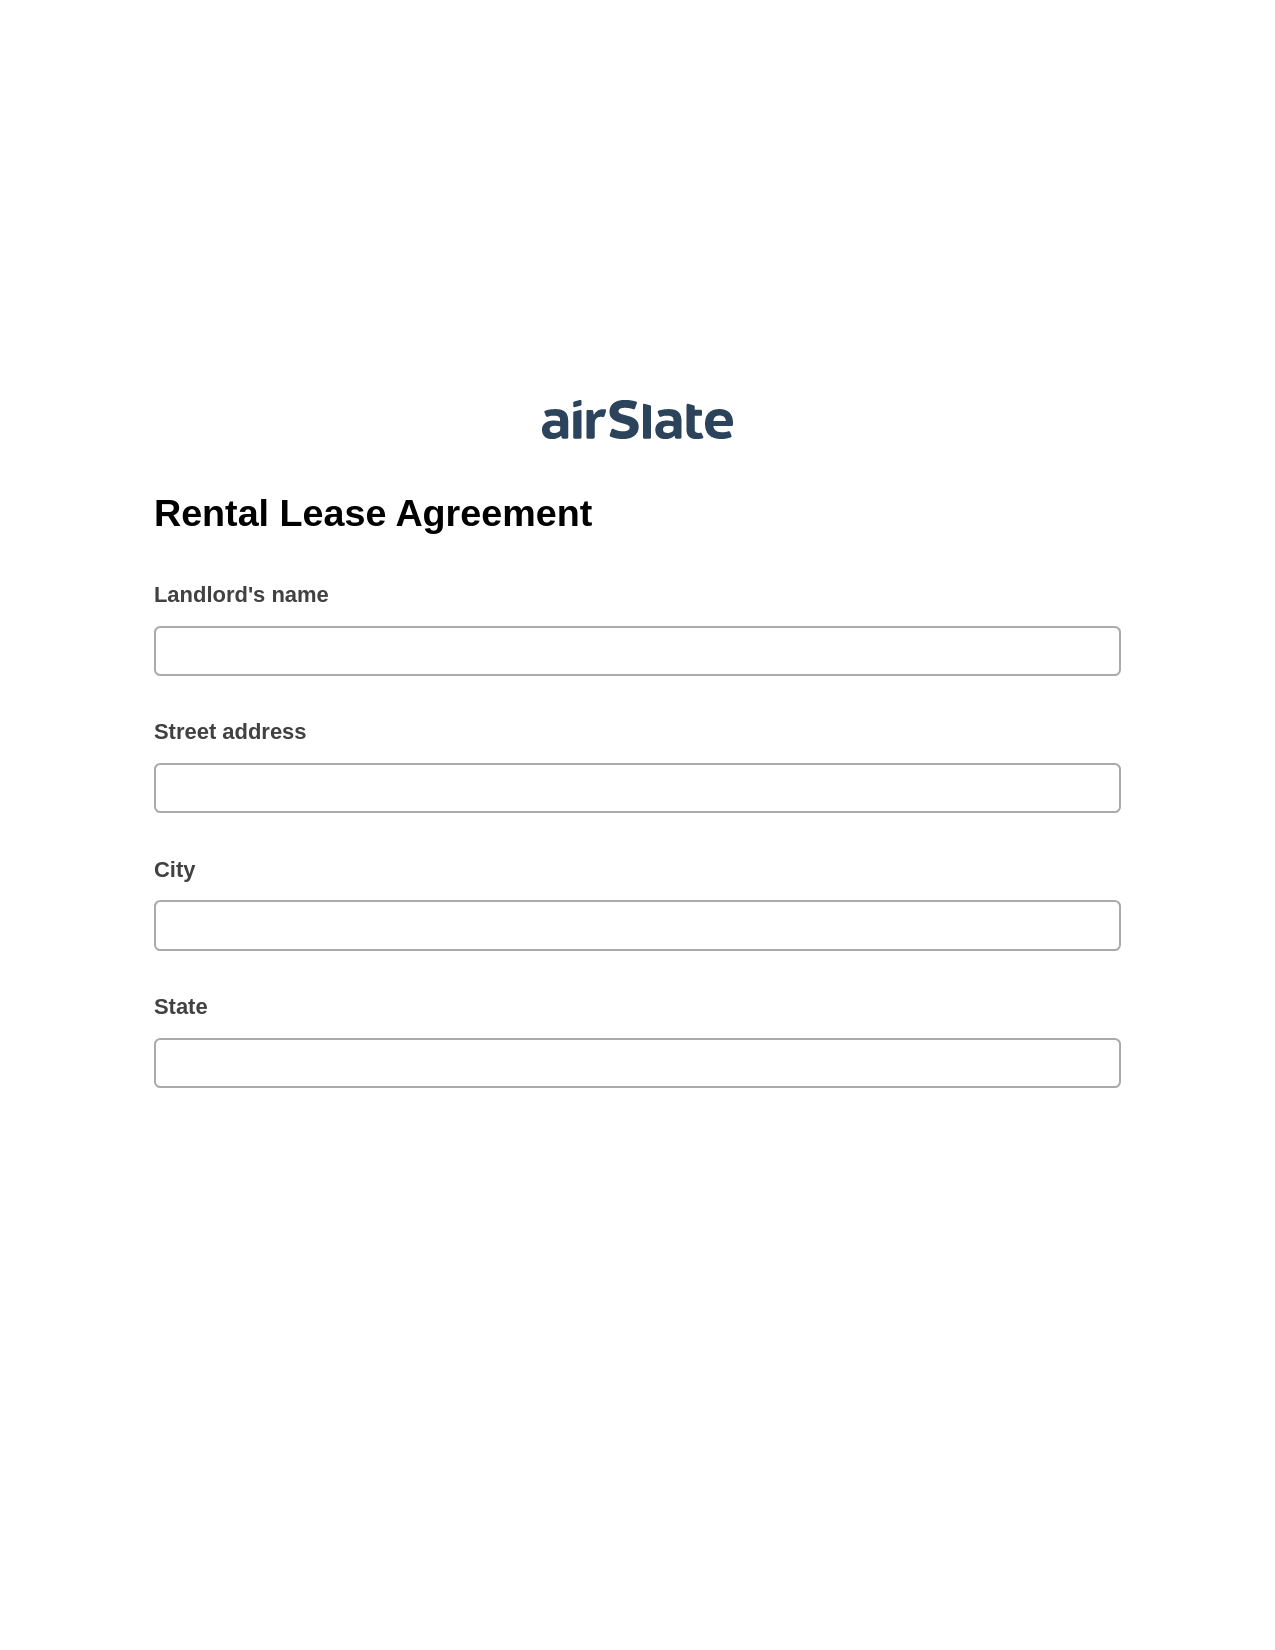 Rental Lease Agreement Pre-fill from MySQL Bot, Invoke Salesforce Process Bot, Export to Formstack Documents Bot